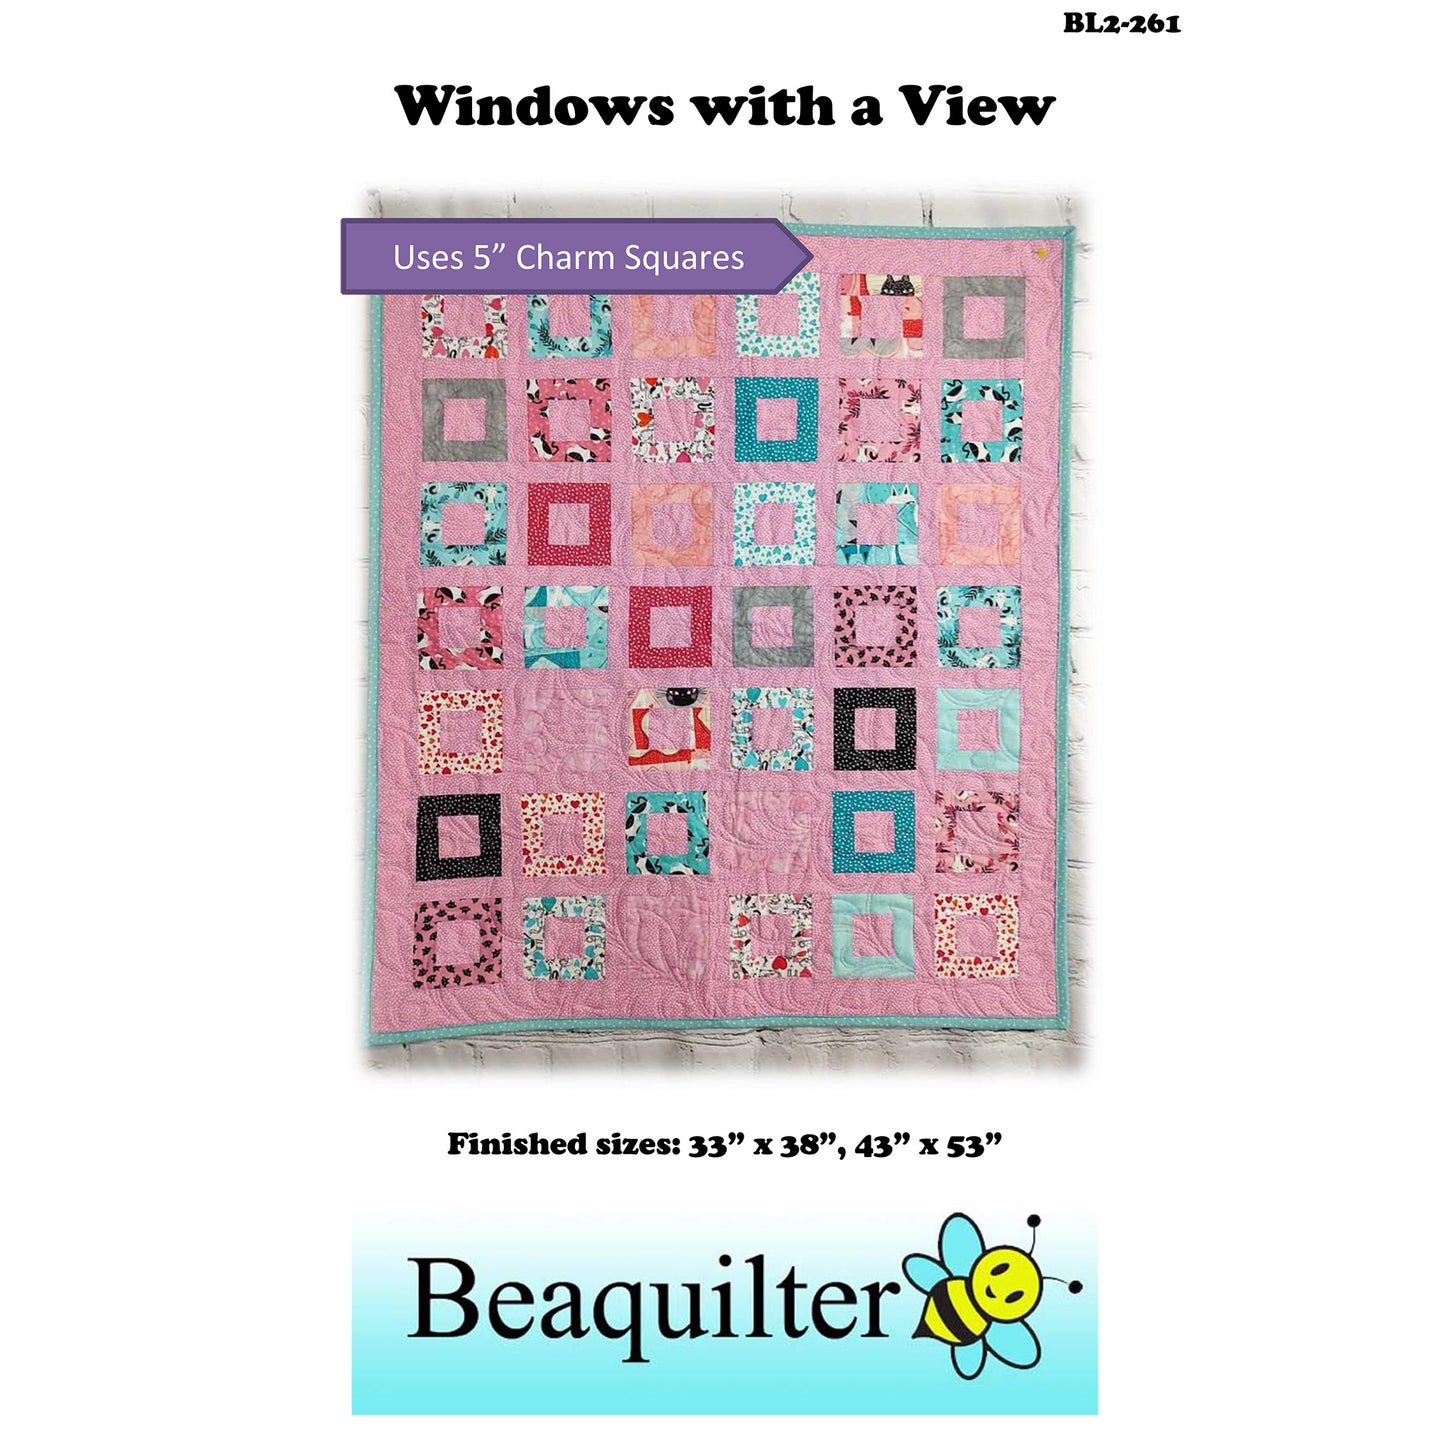 Colorful quilt in pink with rows and columns of frames in different colors.